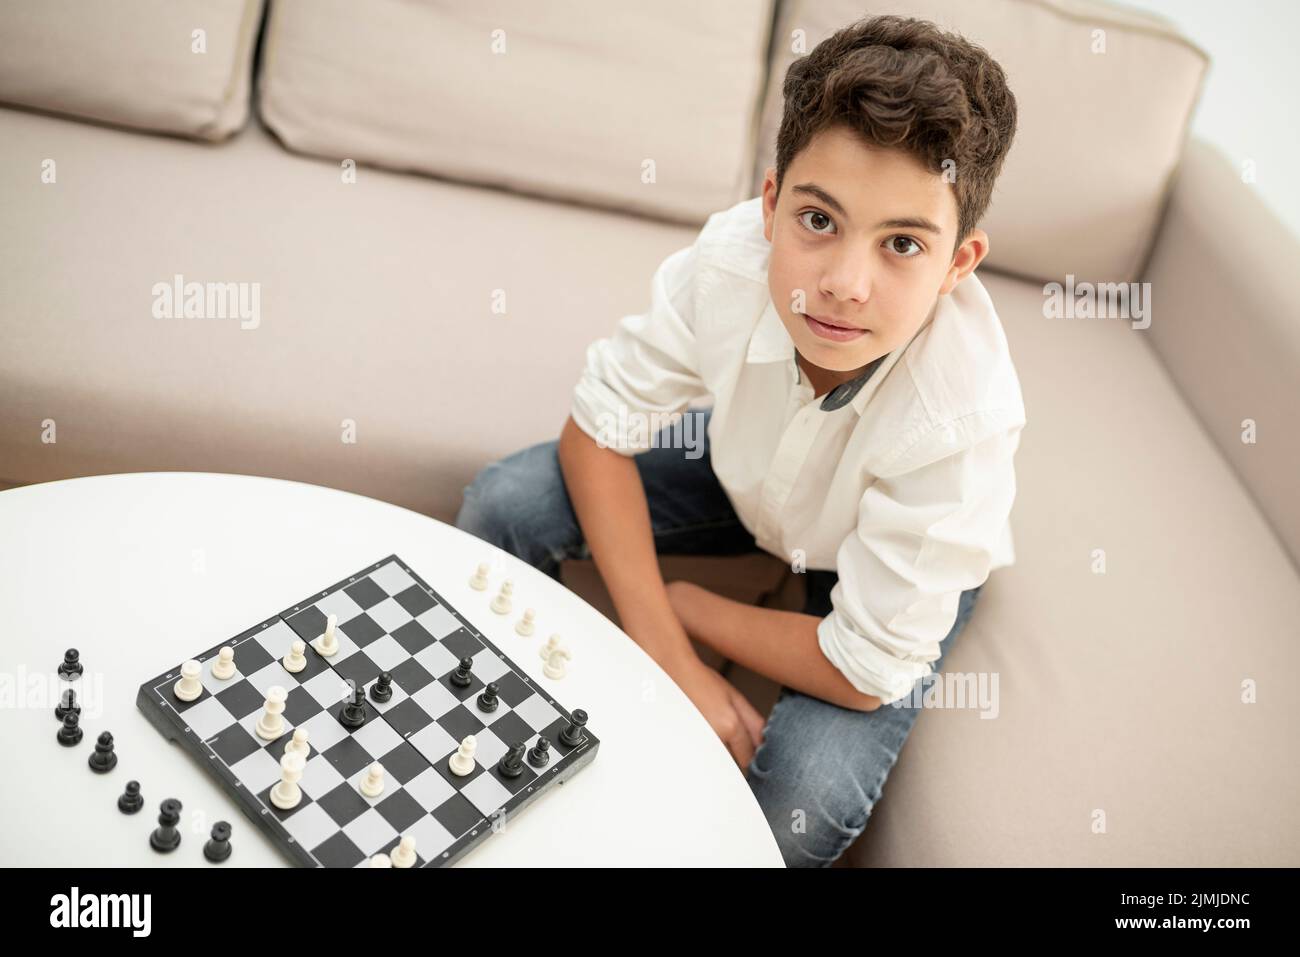 High angle child looking camera Stock Photo